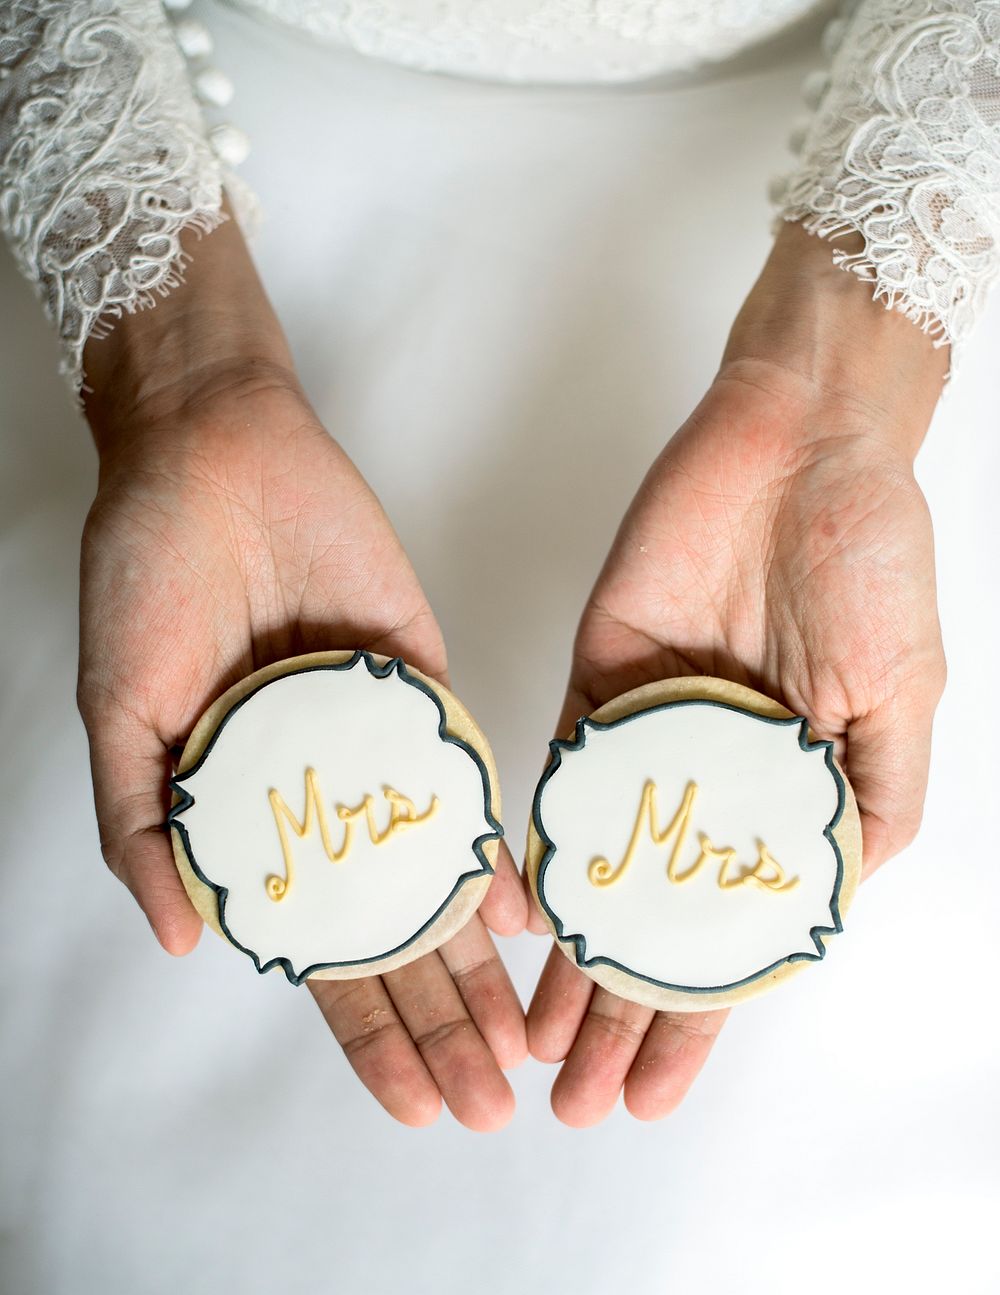 Woman hands holding showing wedding cookies